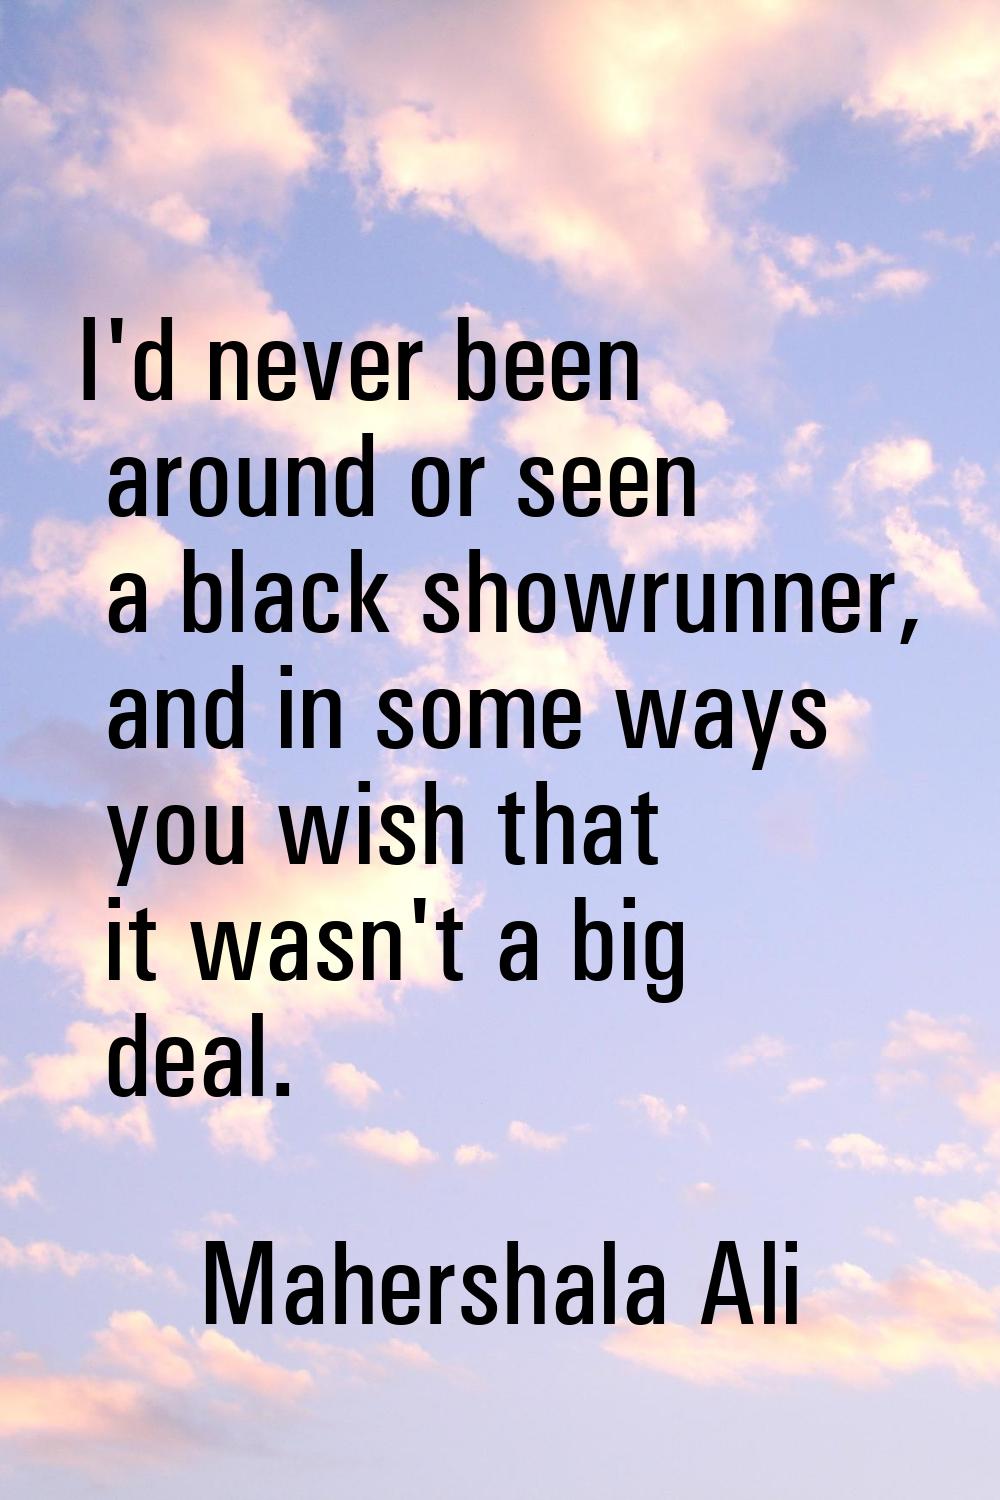 I'd never been around or seen a black showrunner, and in some ways you wish that it wasn't a big de